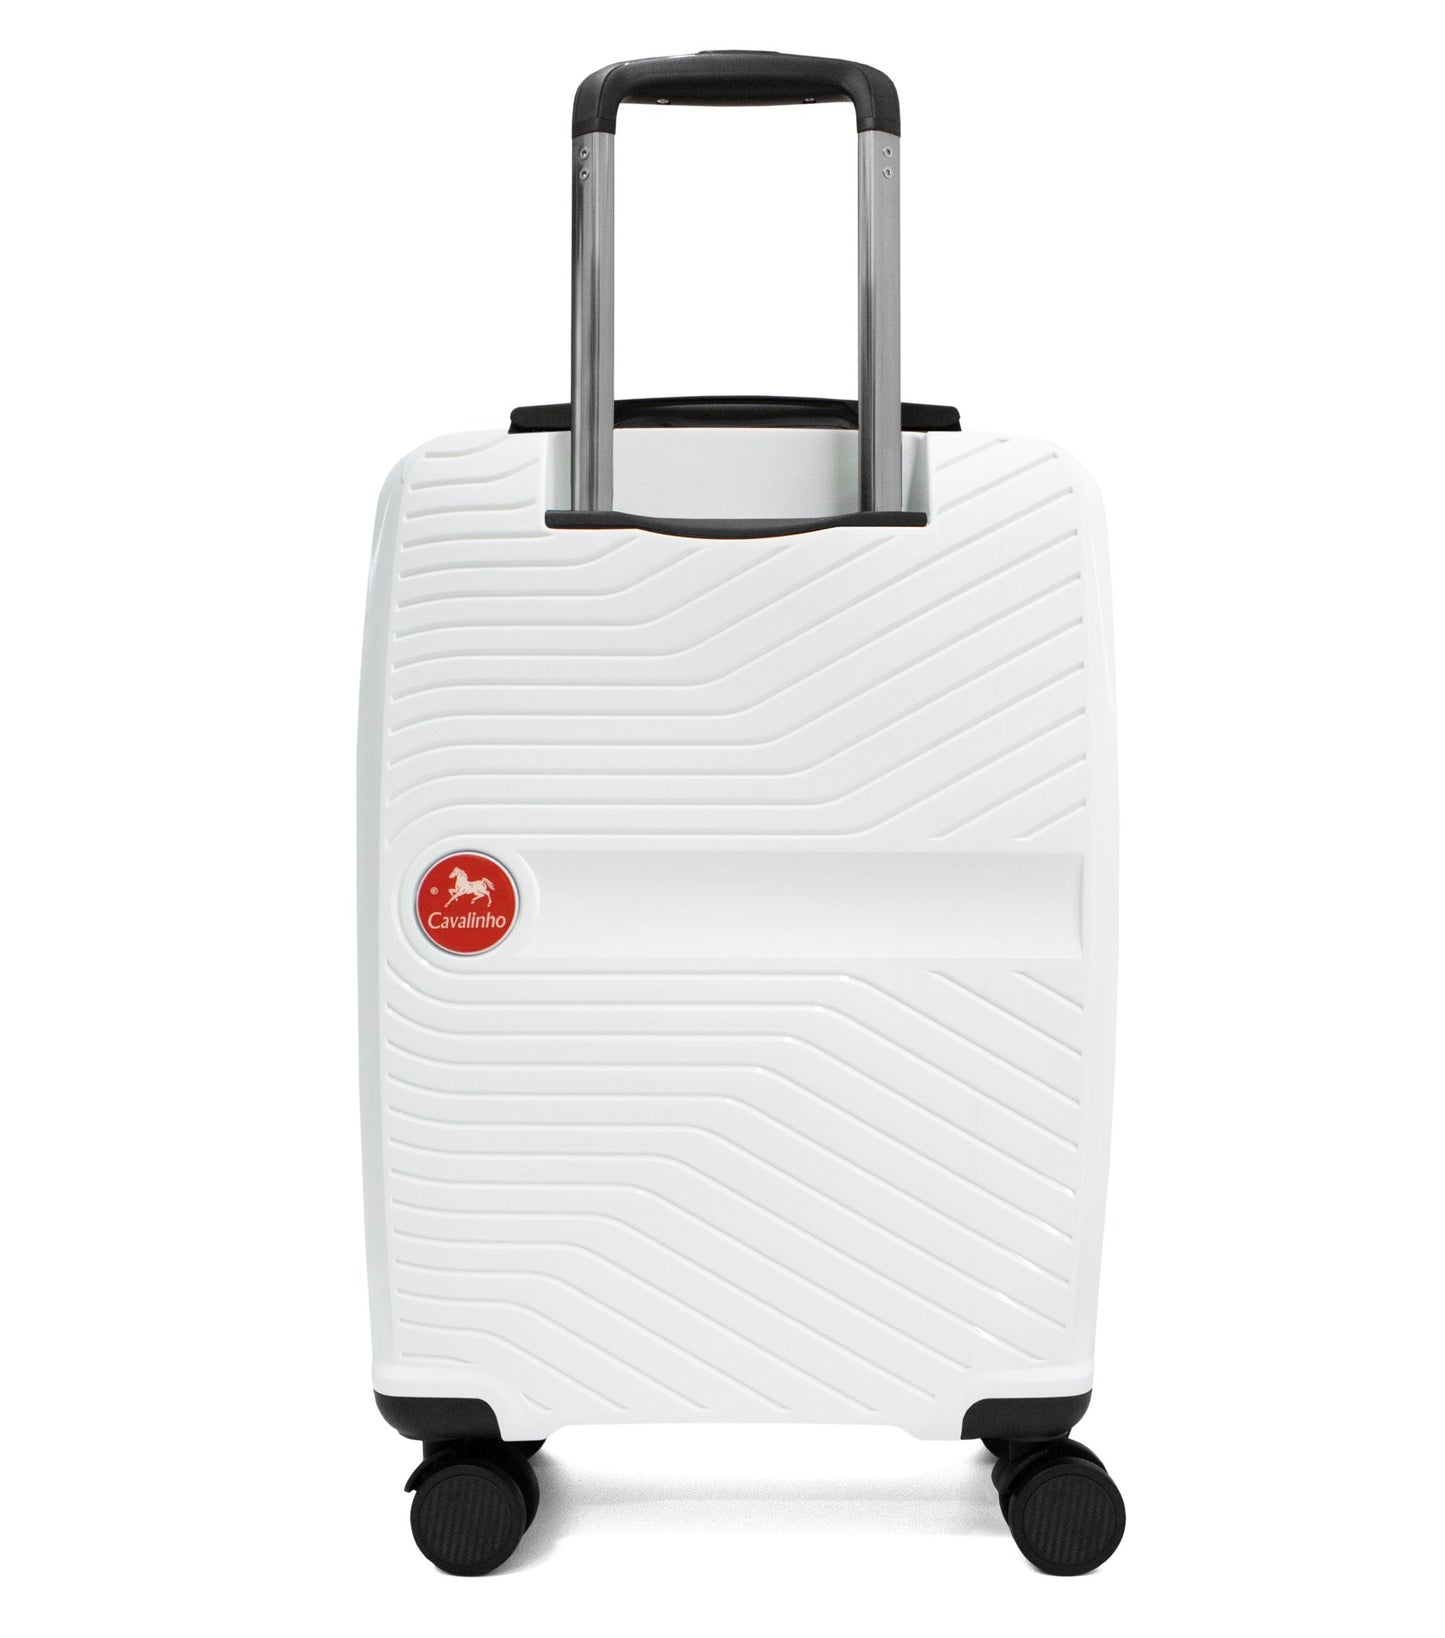 #color_ 19 inch White | Cavalinho Colorful Carry-on Hardside Luggage (19") - 19 inch White - 68020004.06.19_3